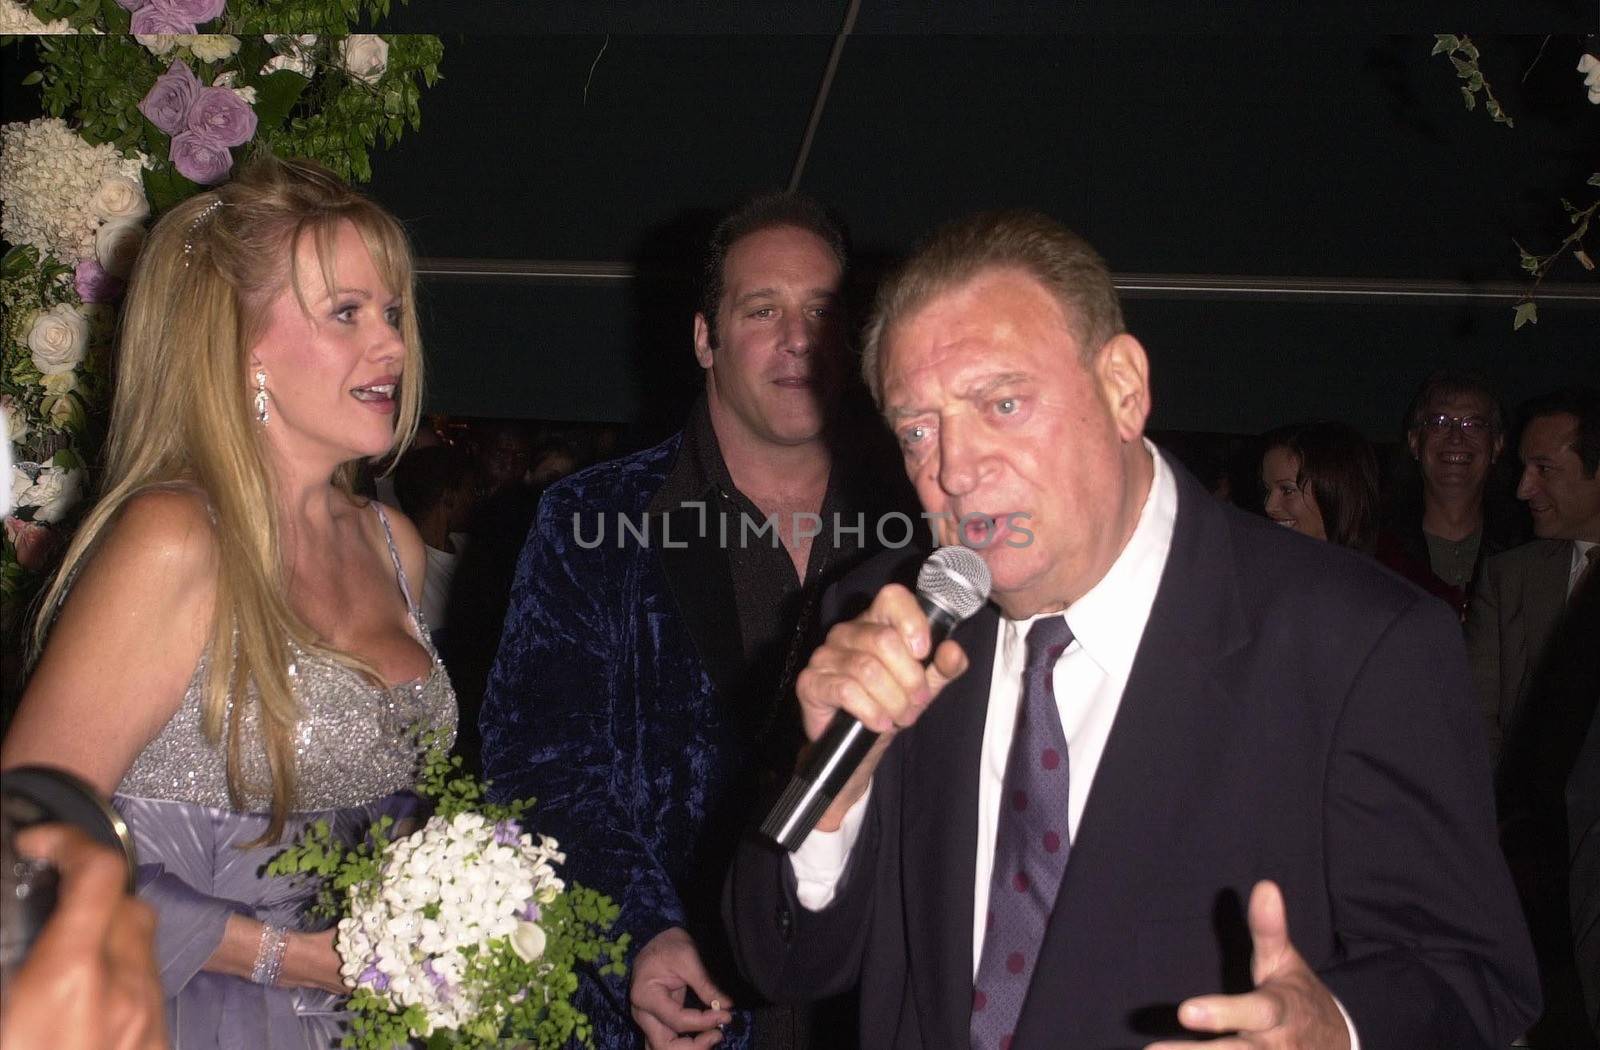 Andrew Dice Clay, Rodney Dangerfield and Joan Child at the premiere of My 5 Wives in Santa Monica. 08-28-00